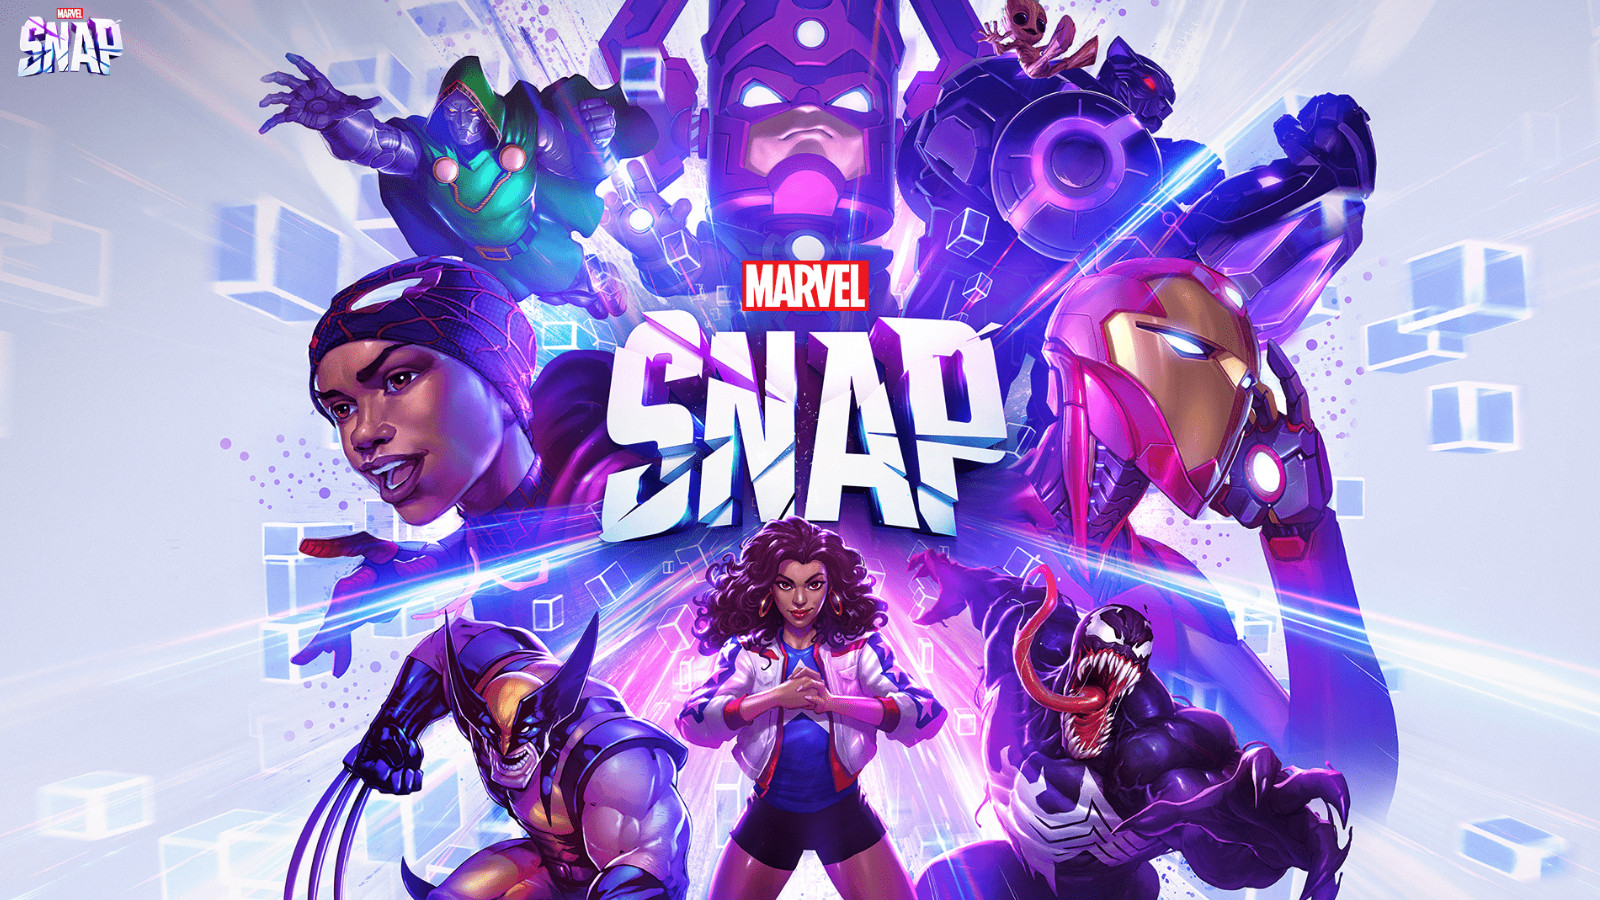 MARVEL SNAP Launches Globally on Mobile and PC